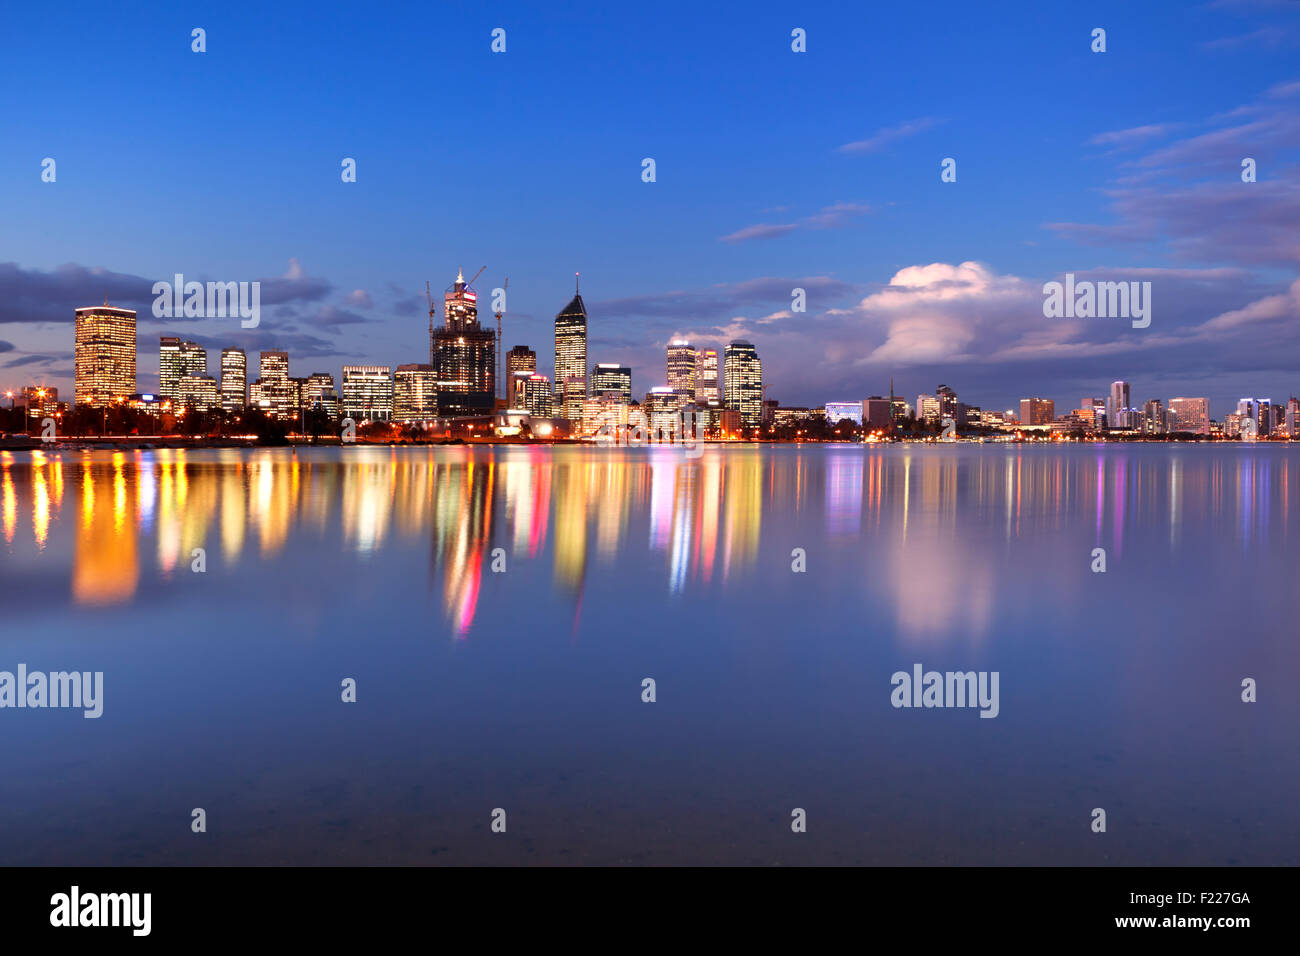 The skyline of Perth, Western Australia at night. Photographed from across the Swan River. Stock Photo